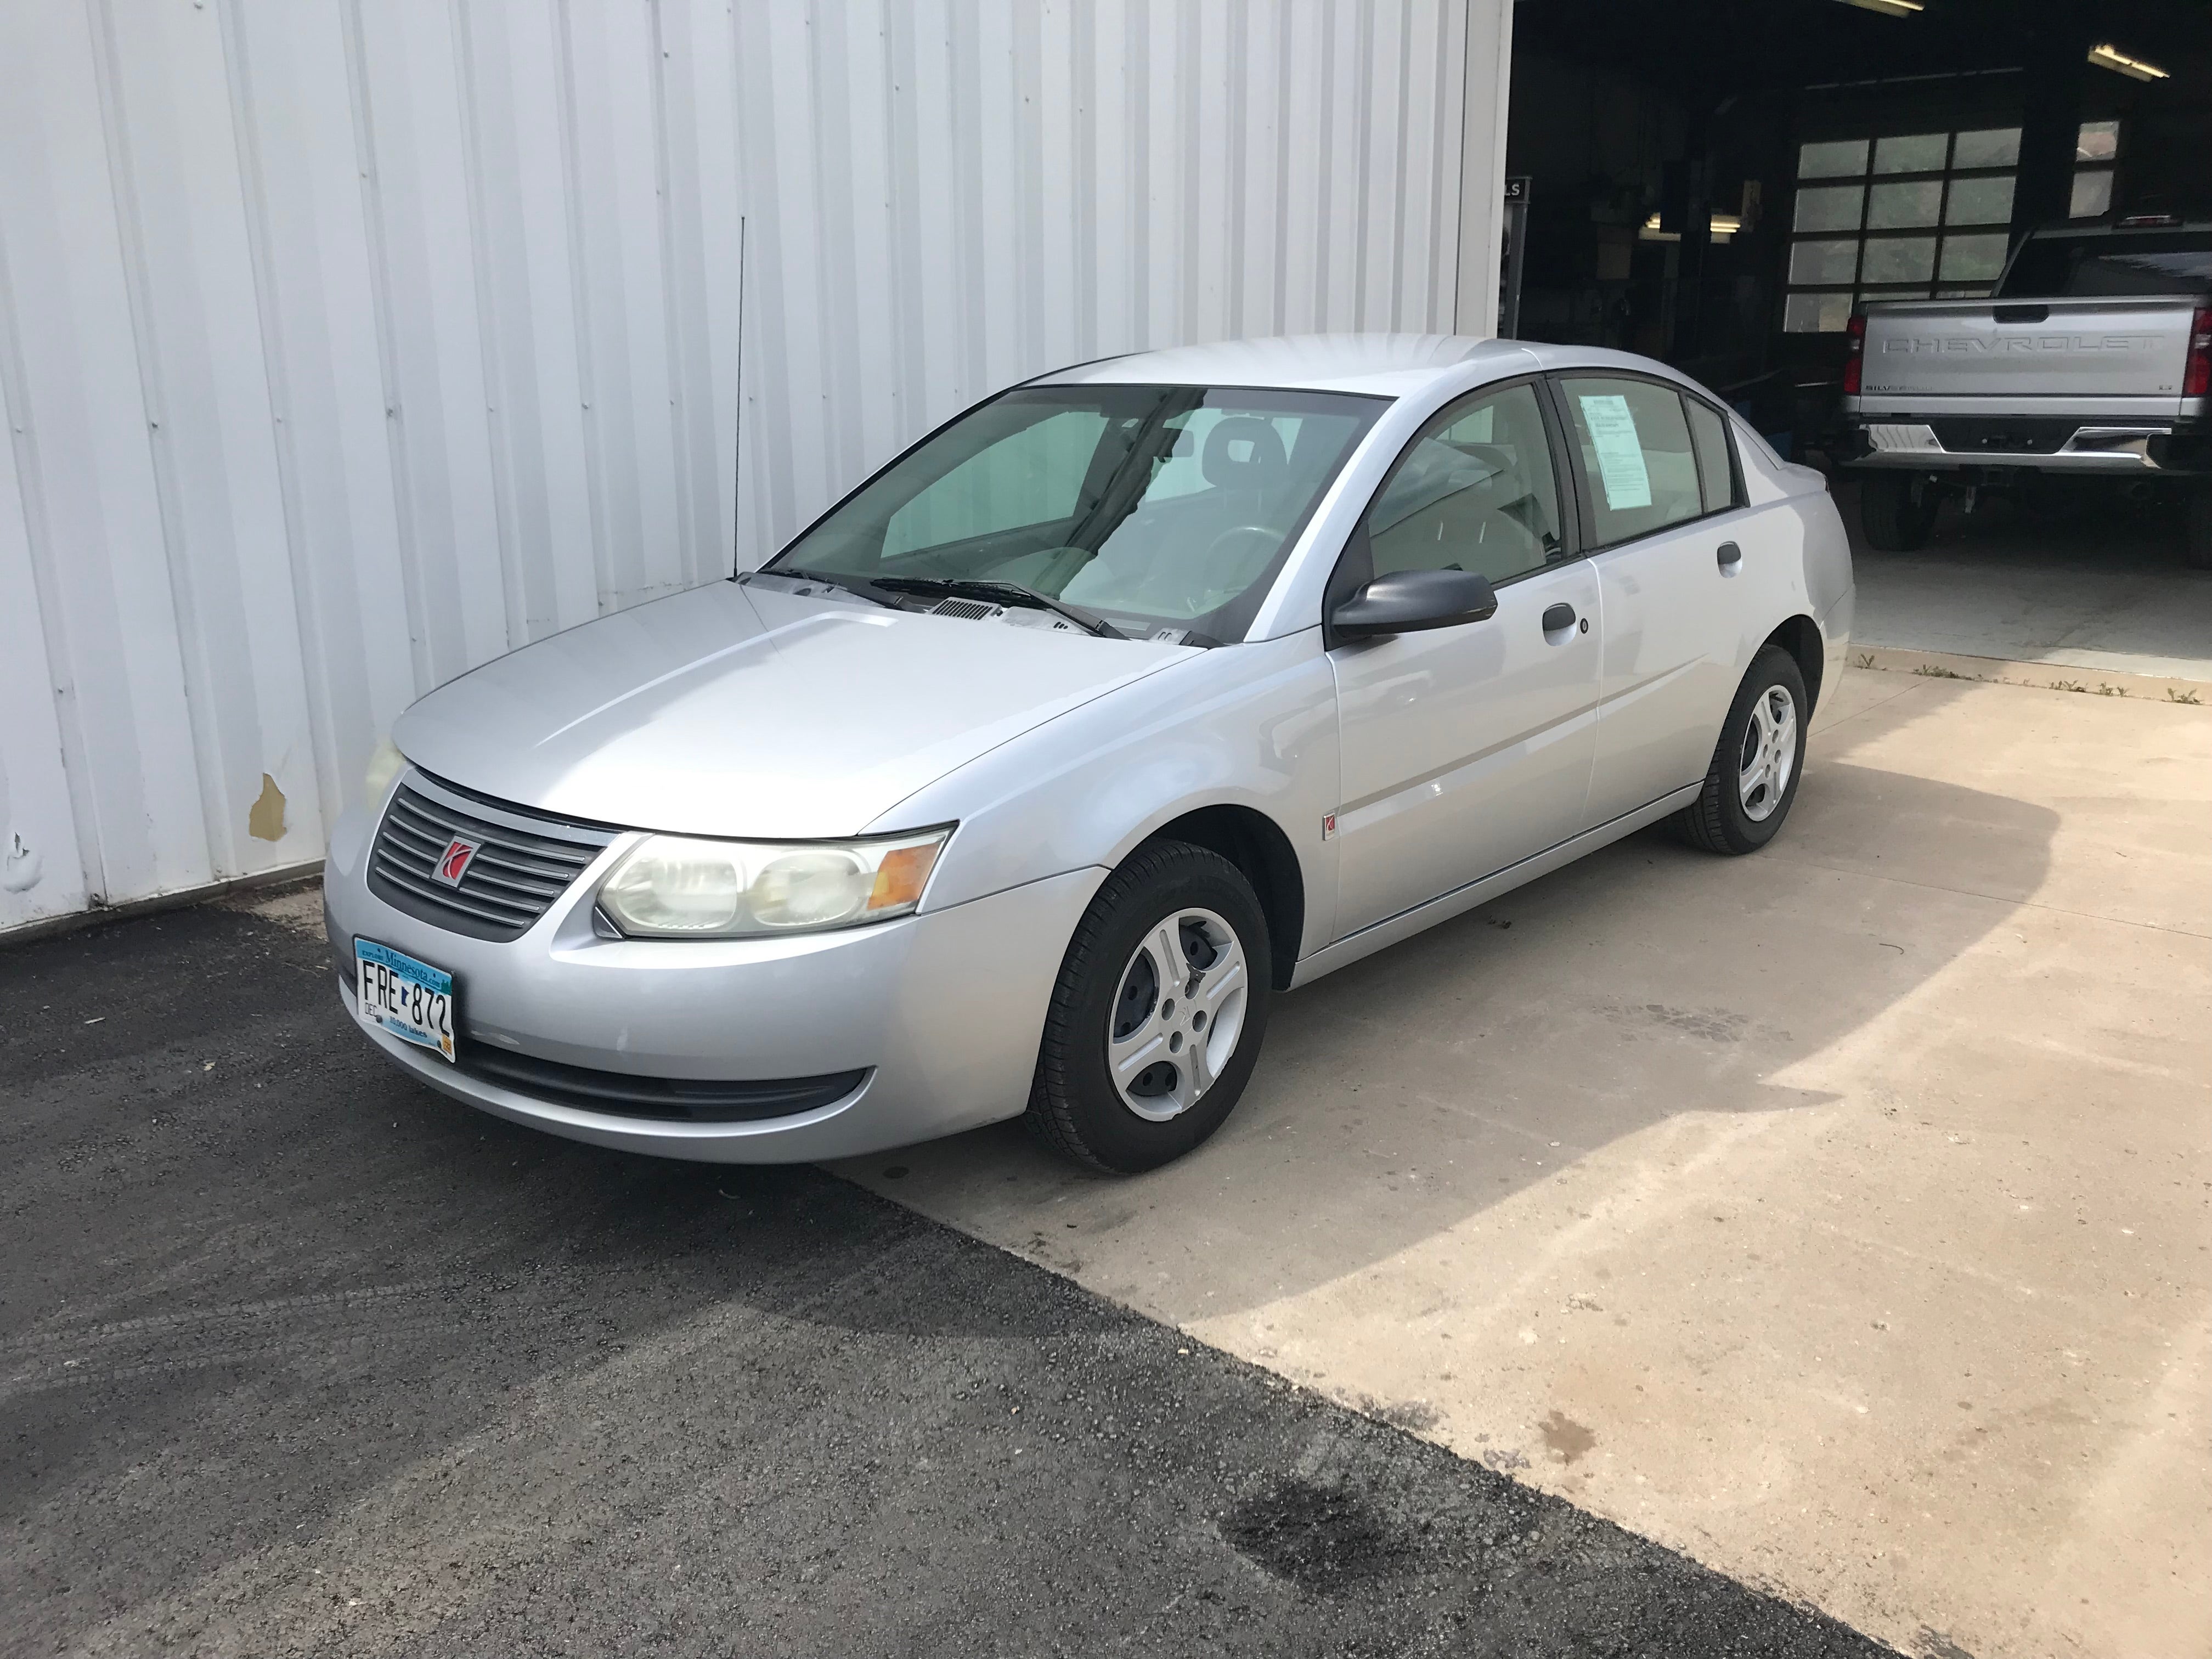 Used 2005 Saturn ION 1 with VIN 1G8AG52F05Z155076 for sale in Arlington, Minnesota